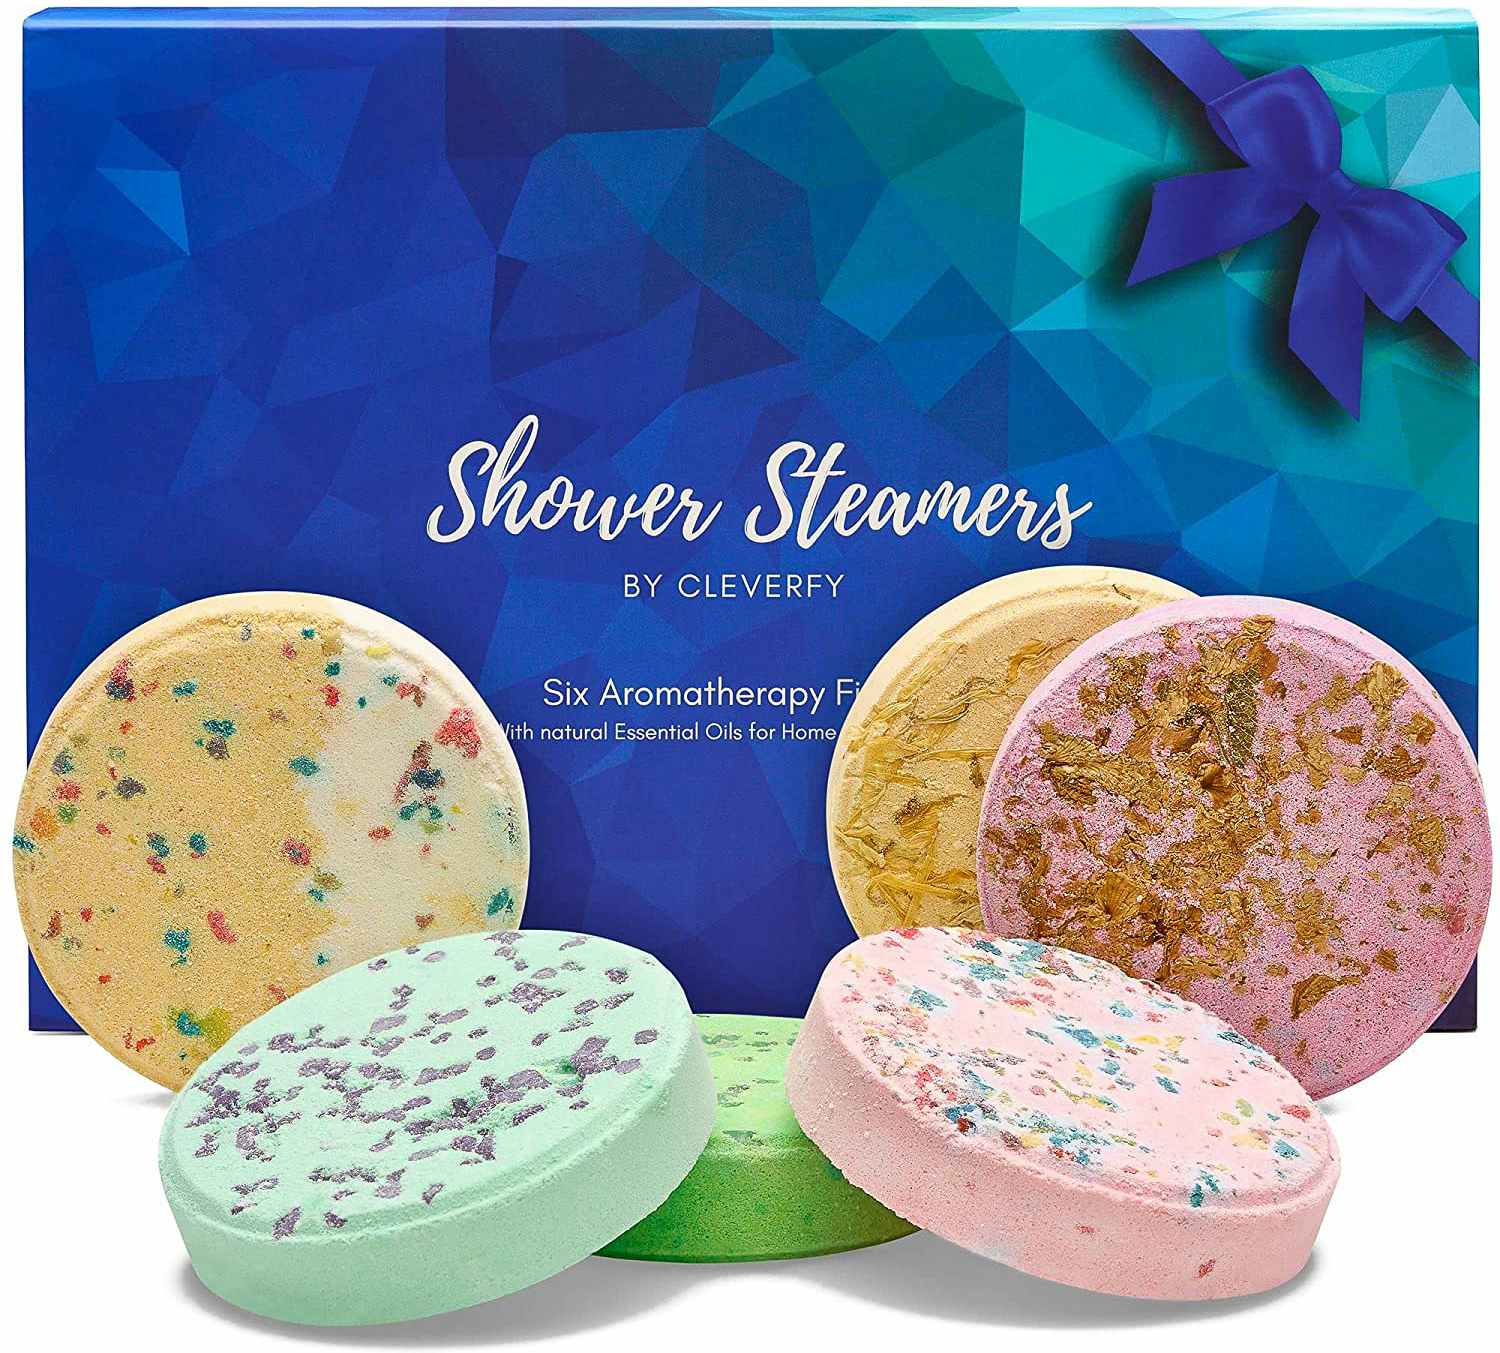 best stocking stuffer ideas - Some Cleverfy Shower Steamers with their box